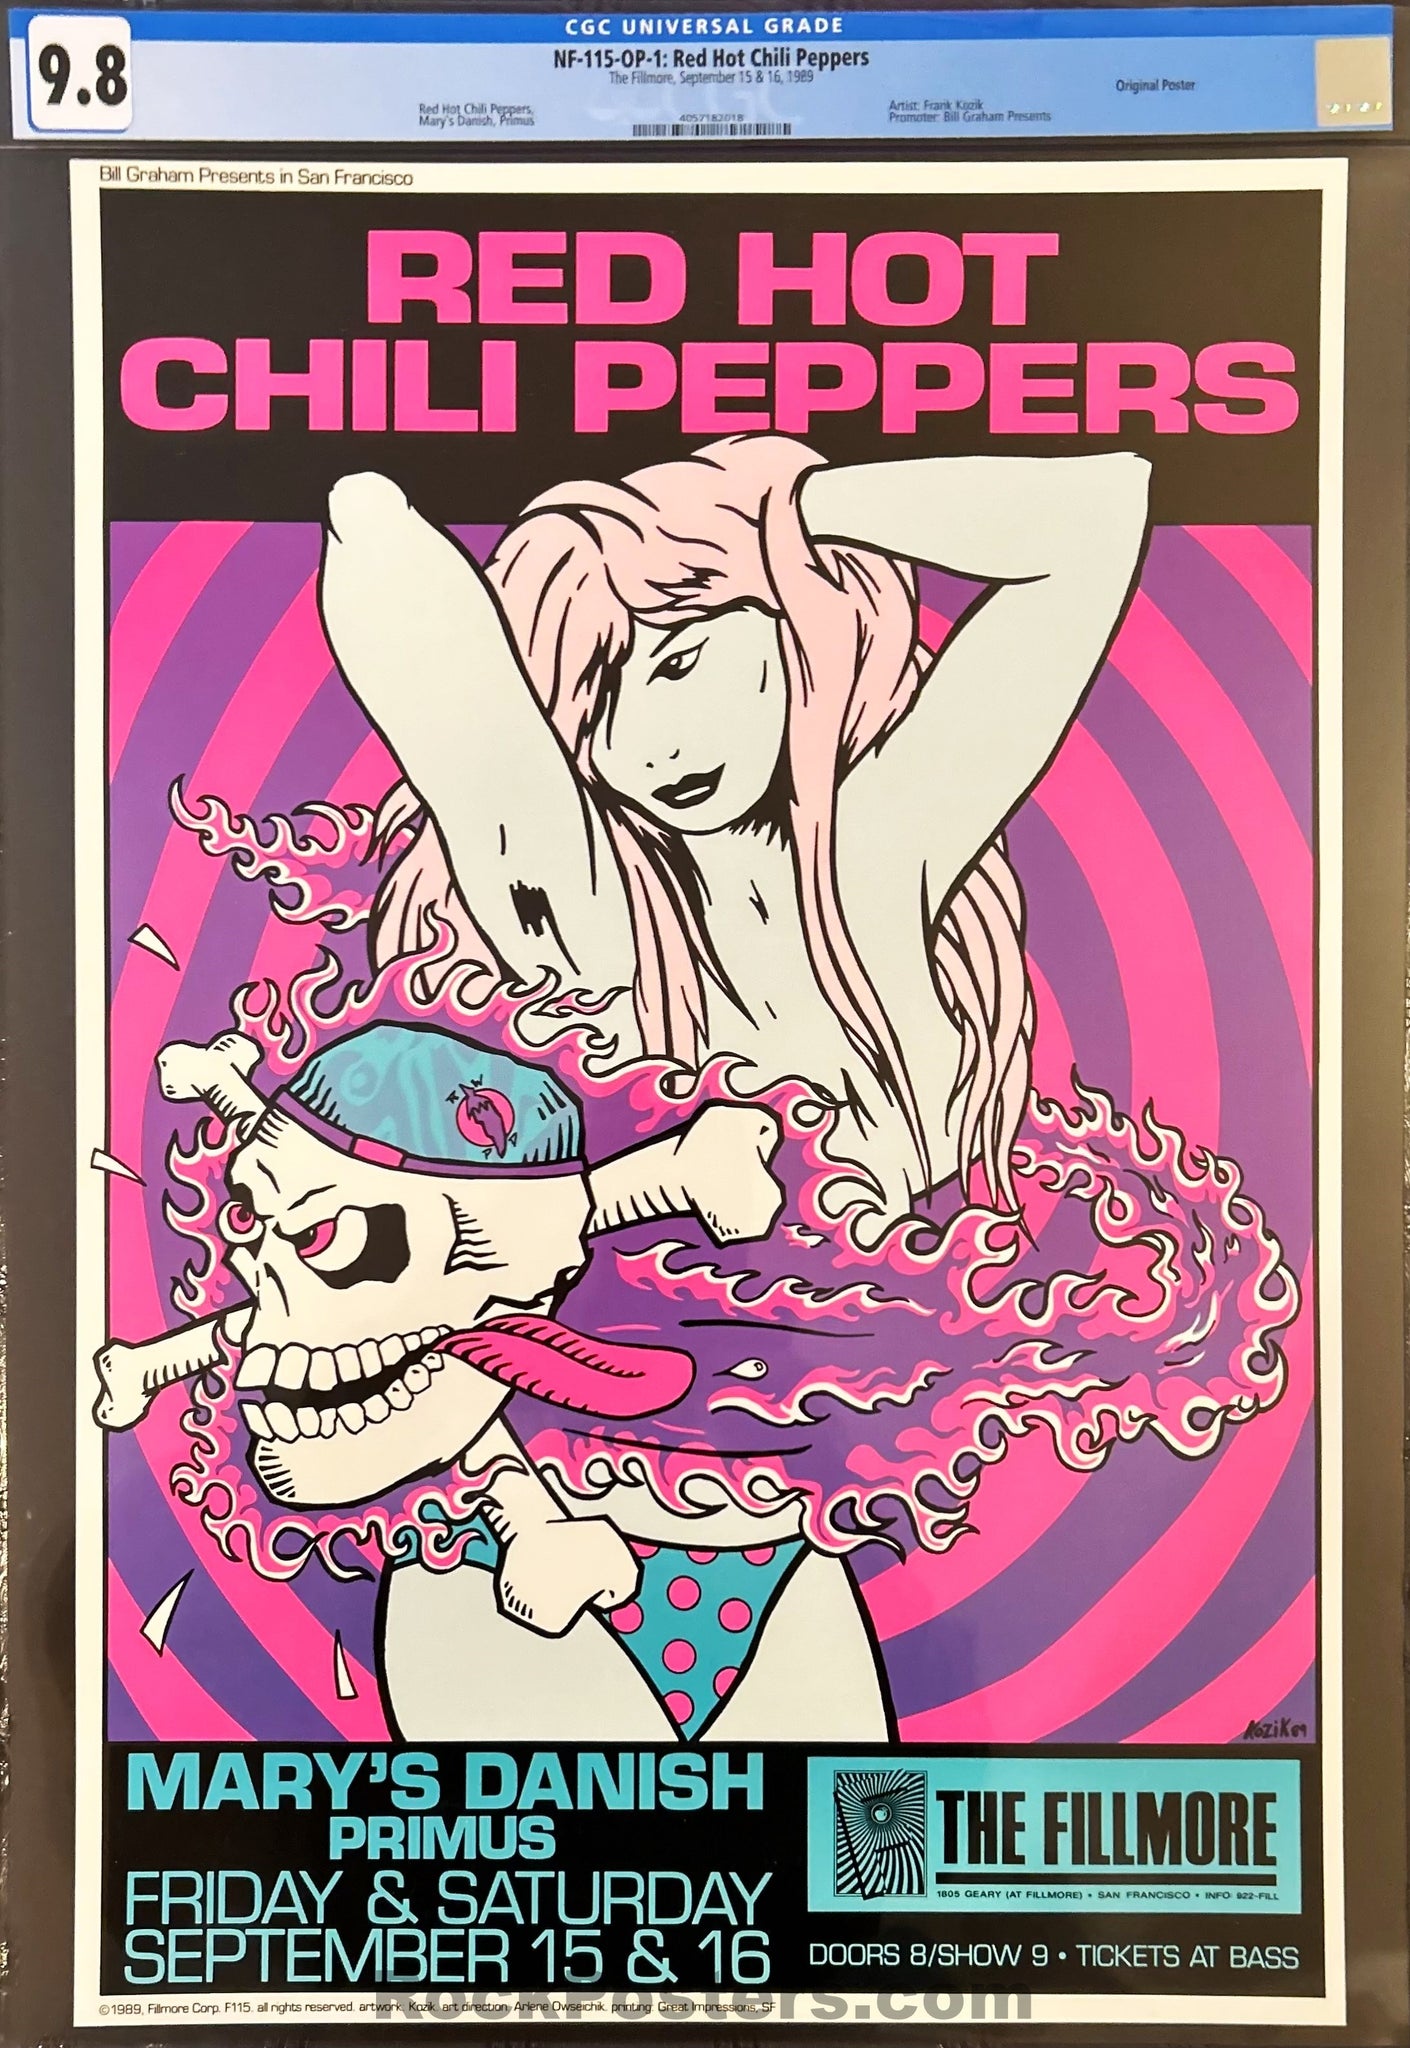 NF-115 - Red Hot Chili Peppers - Frank Kozik - 1989 Poster - Fillmore Auditorium - CGC Graded 9.8